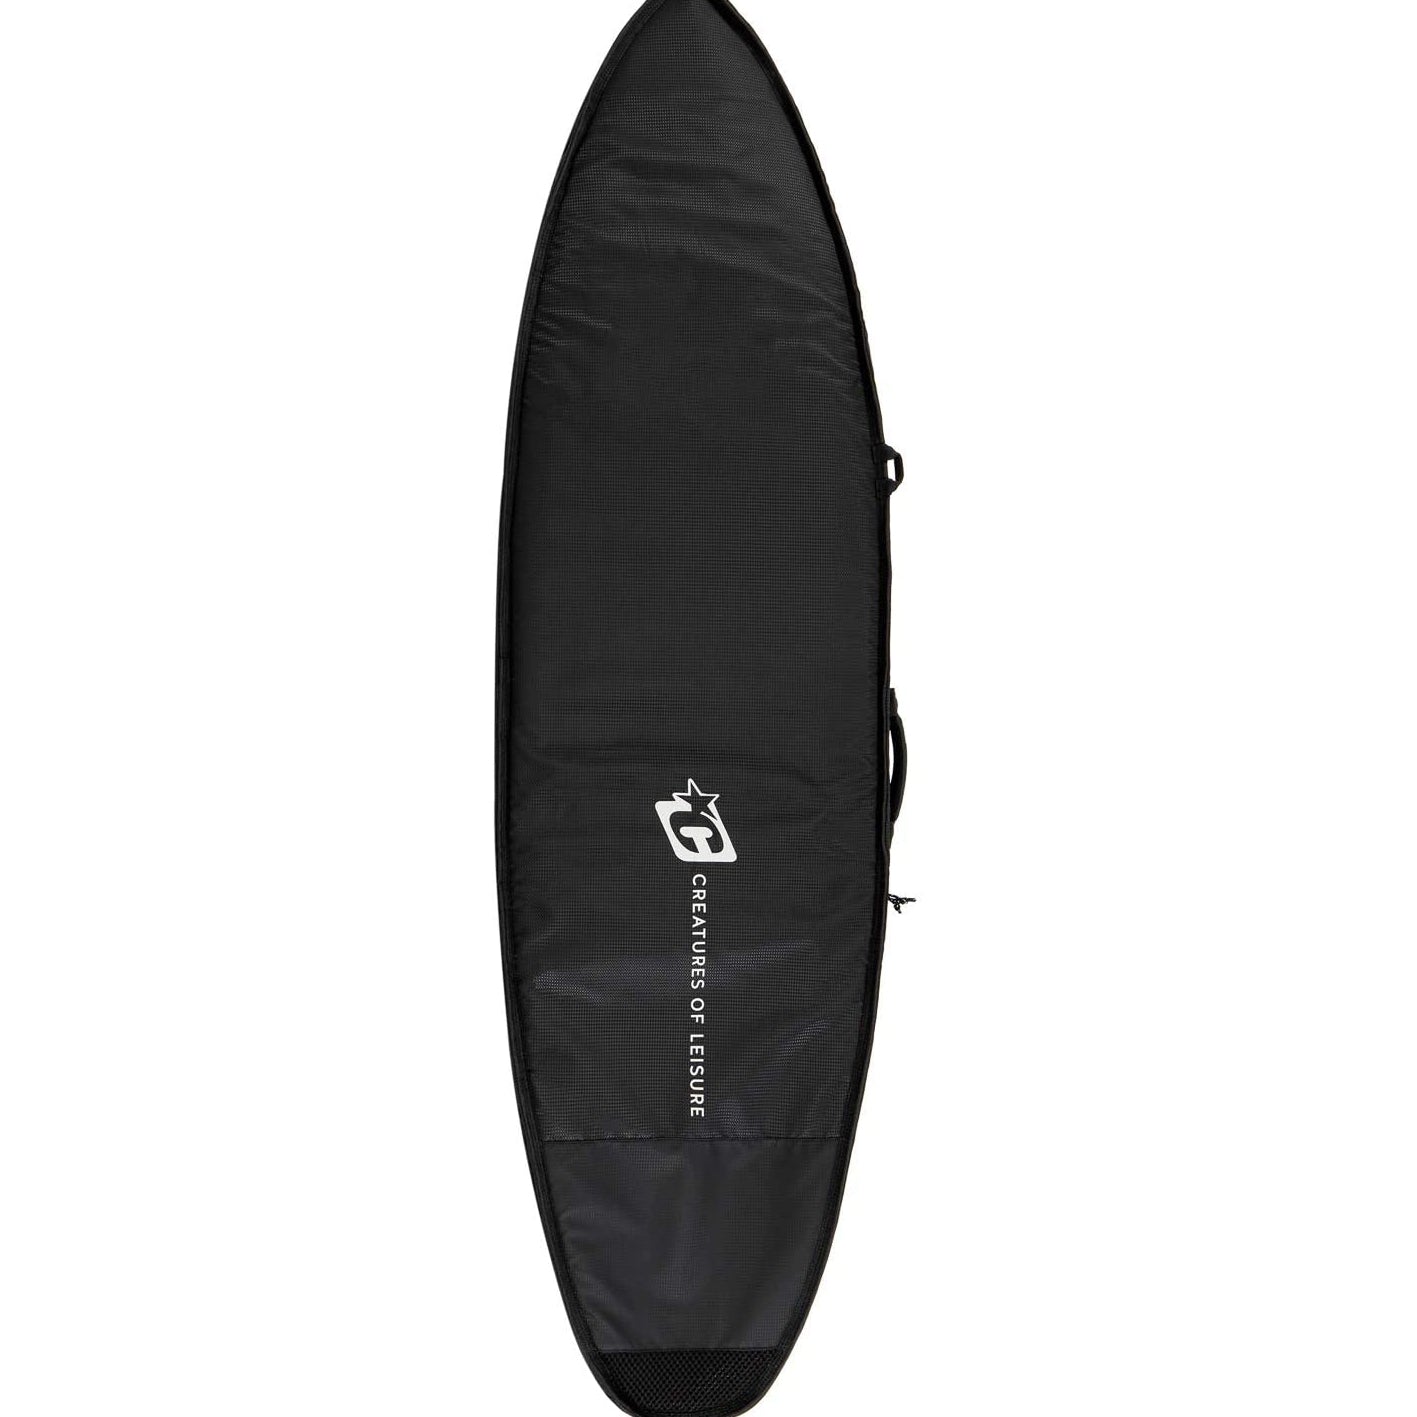 Creatures of Leisure Day Use DT2.0 Shortboard Boardbag Black-Silver 5ft8in